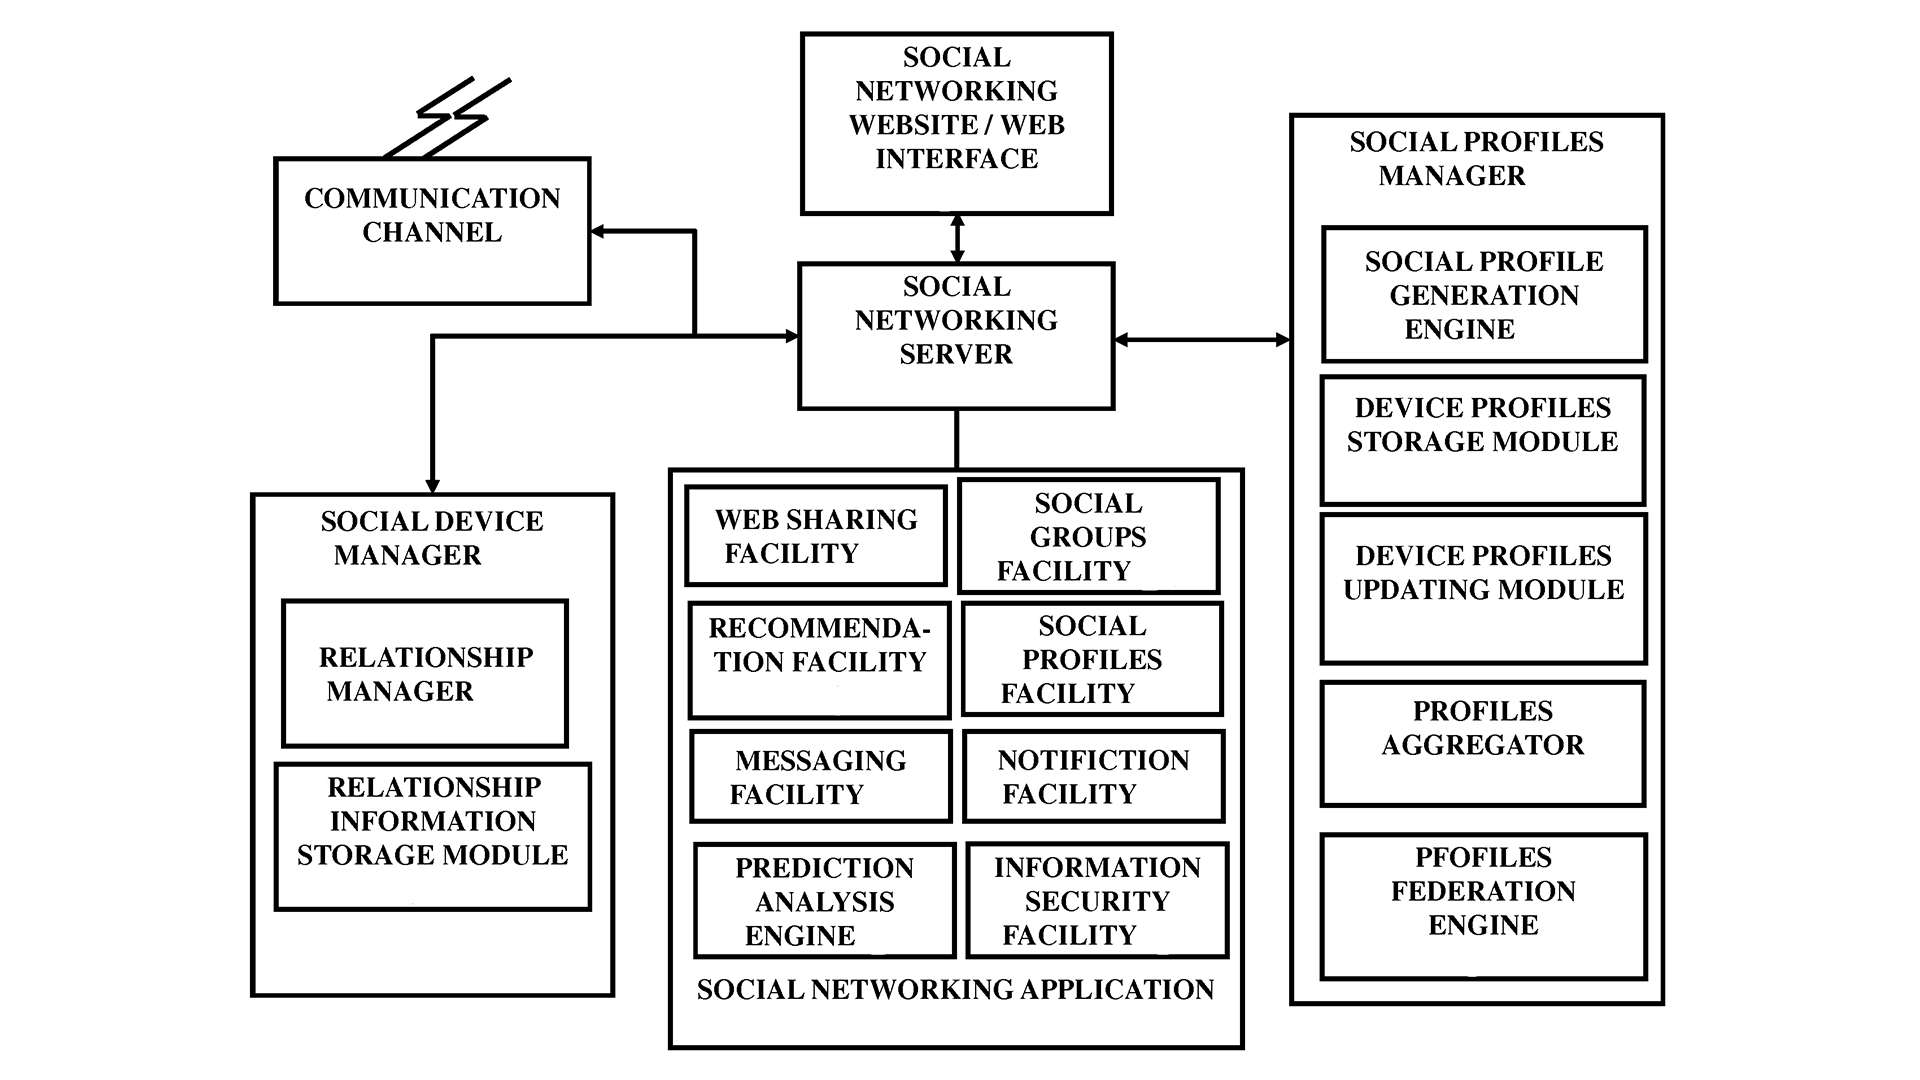 Integrated Healthcare System with Predictive Analytics and Risk Management through Social Networking